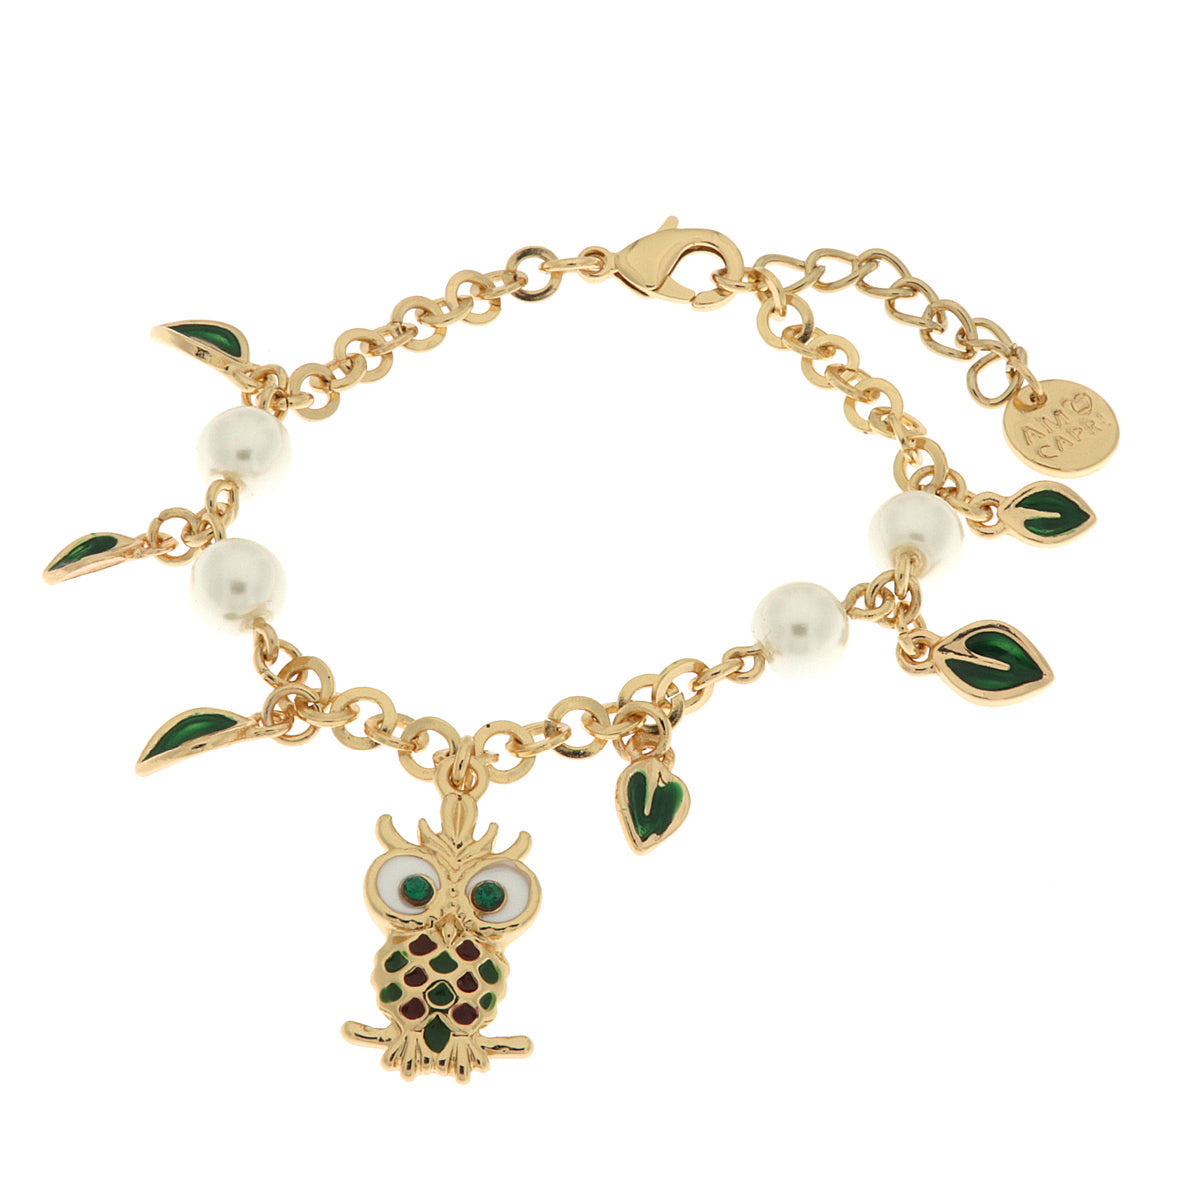 Metal bracelet with lucky owl, green crystals and pearls